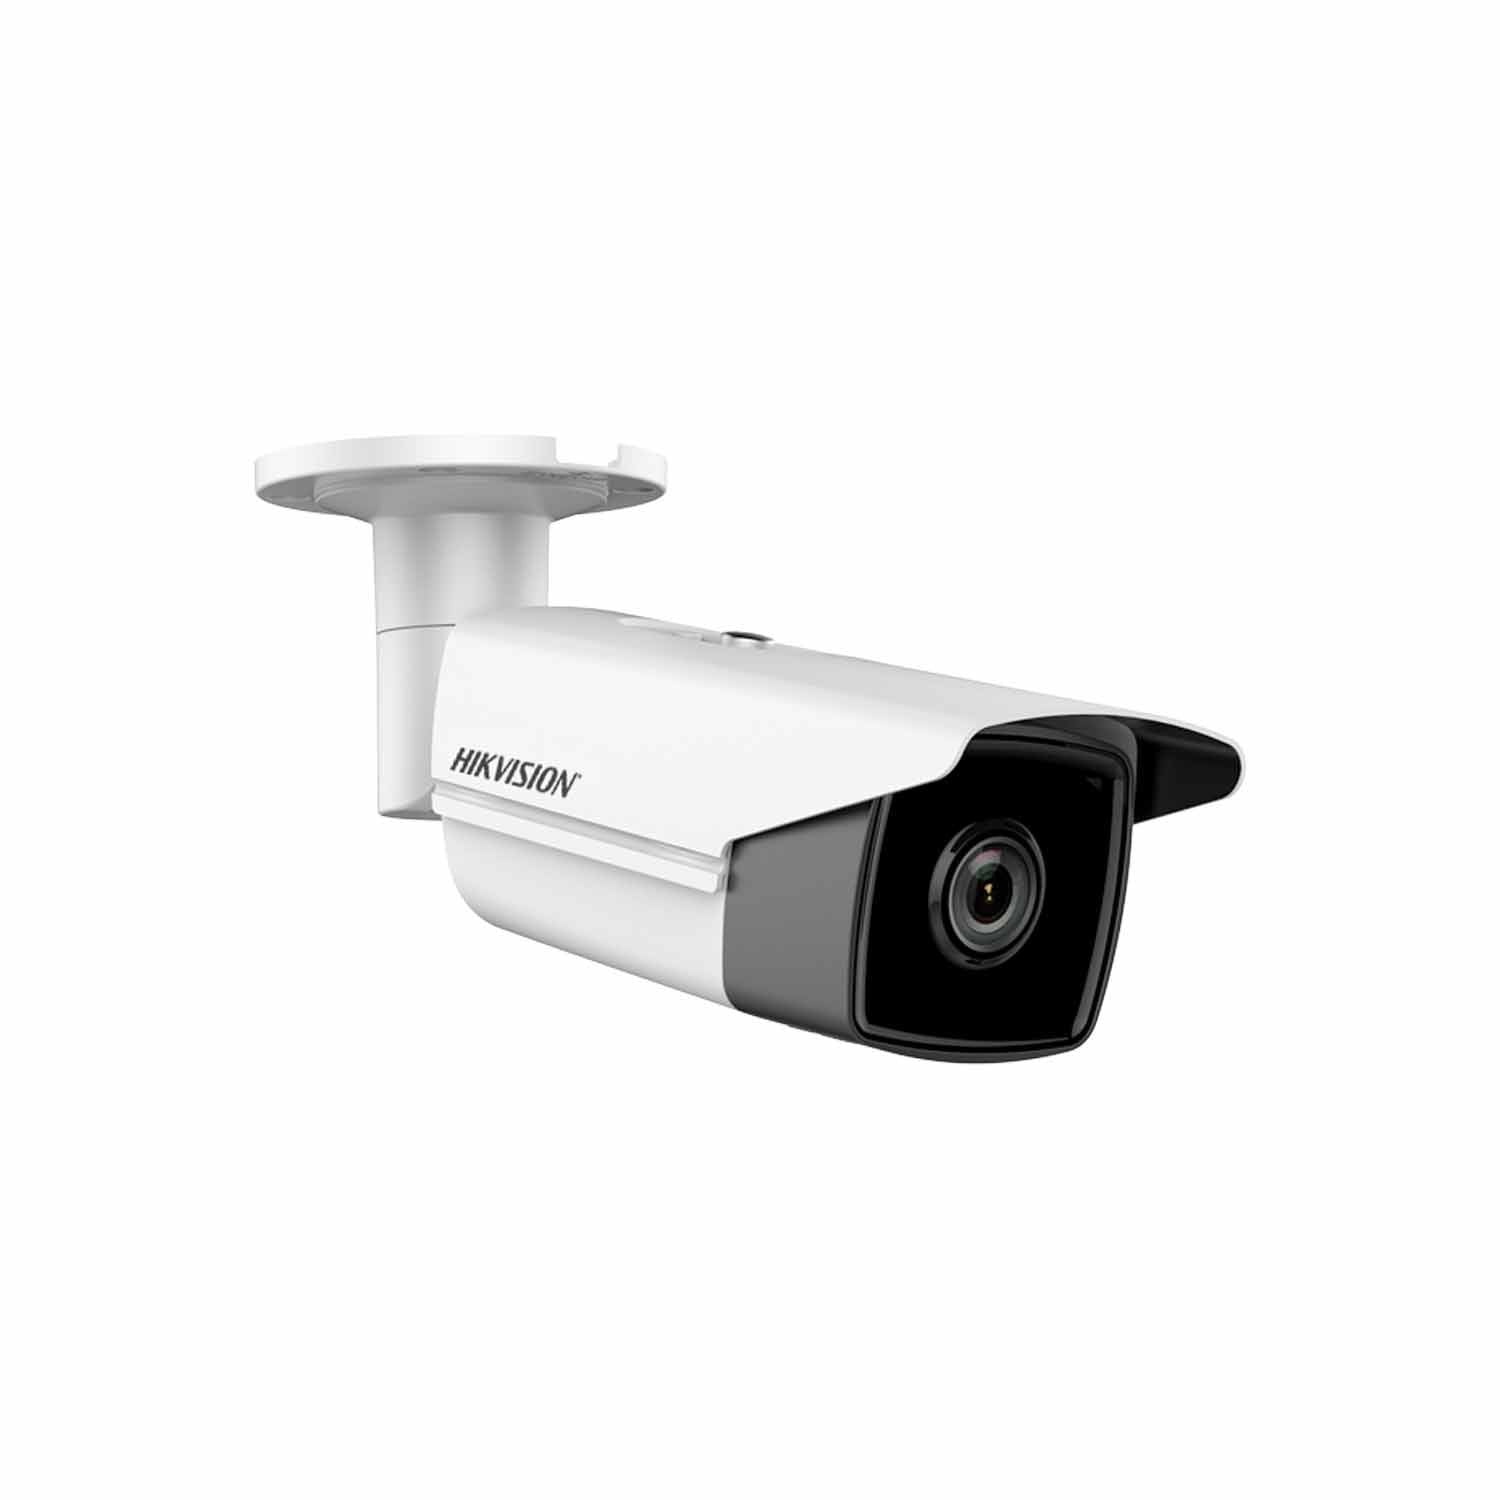 Hikvision DS-2CD2T55FWD-IS 5MP Bullet Camera